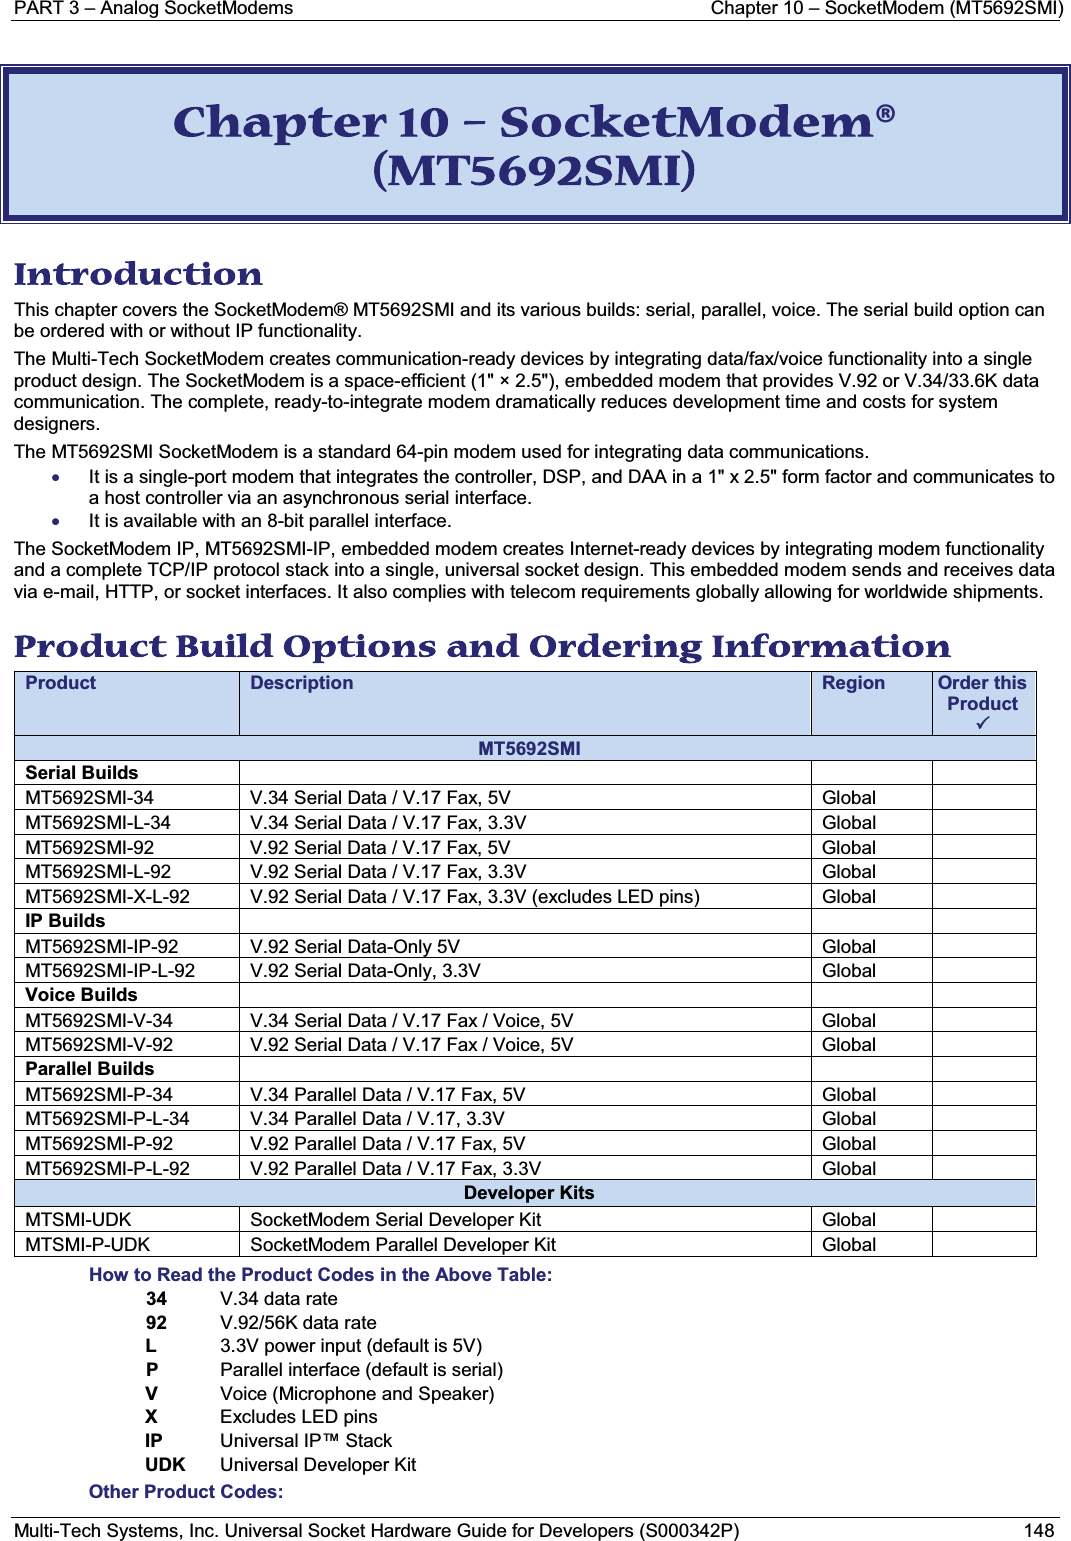 PART 3 – Analog SocketModems Chapter 10 – SocketModem (MT5692SMI)Multi-Tech Systems, Inc. Universal Socket Hardware Guide for Developers (S000342P) 148CChapter 10 – SocketModem® (MT5692SMI) Introduction  This chapter covers the SocketModem® MT5692SMI and its various builds: serial, parallel, voice. The serial build option can be ordered with or without IP functionality.The Multi-Tech SocketModem creates communication-ready devices by integrating data/fax/voice functionality into a single product design. The SocketModem is a space-efficient (1&quot; × 2.5&quot;), embedded modem that provides V.92 or V.34/33.6K data communication. The complete, ready-to-integrate modem dramatically reduces development time and costs for system designers. The MT5692SMI SocketModem is a standard 64-pin modem used for integrating data communications. xIt is a single-port modem that integrates the controller, DSP, and DAA in a 1&quot; x 2.5&quot; form factor and communicates to a host controller via an asynchronous serial interface.xIt is available with an 8-bit parallel interface.The SocketModem IP, MT5692SMI-IP, embedded modem creates Internet-ready devices by integrating modem functionality and a complete TCP/IP protocol stack into a single, universal socket design. This embedded modem sends and receives data via e-mail, HTTP, or socket interfaces. It also complies with telecom requirements globally allowing for worldwide shipments.Product Build Options and Ordering Information Product Description Region Order this Product3MT5692SMISerial BuildsMT5692SMI-34 V.34 Serial Data / V.17 Fax, 5V GlobalMT5692SMI-L-34 V.34 Serial Data / V.17 Fax, 3.3V GlobalMT5692SMI-92 V.92 Serial Data / V.17 Fax, 5V GlobalMT5692SMI-L-92 V.92 Serial Data / V.17 Fax, 3.3V GlobalMT5692SMI-X-L-92 V.92 Serial Data / V.17 Fax, 3.3V (excludes LED pins) GlobalIP BuildsMT5692SMI-IP-92 V.92 Serial Data-Only 5V GlobalMT5692SMI-IP-L-92 V.92 Serial Data-Only, 3.3V GlobalVoice BuildsMT5692SMI-V-34 V.34 Serial Data / V.17 Fax / Voice, 5V GlobalMT5692SMI-V-92 V.92 Serial Data / V.17 Fax / Voice, 5V GlobalParallel BuildsMT5692SMI-P-34 V.34 Parallel Data / V.17 Fax, 5V GlobalMT5692SMI-P-L-34 V.34 Parallel Data / V.17, 3.3V GlobalMT5692SMI-P-92 V.92 Parallel Data / V.17 Fax, 5V GlobalMT5692SMI-P-L-92 V.92 Parallel Data / V.17 Fax, 3.3V GlobalDeveloper KitsMTSMI-UDK SocketModem Serial Developer Kit GlobalMTSMI-P-UDK SocketModem Parallel Developer Kit GlobalHow to Read the Product Codes in the Above Table:34 V.34 data rate92 V.92/56K data rateL3.3V power input (default is 5V)PParallel interface (default is serial)VVoice (Microphone and Speaker)XExcludes LED pinsIP Universal IP™ StackUDK Universal Developer KitOther Product Codes: